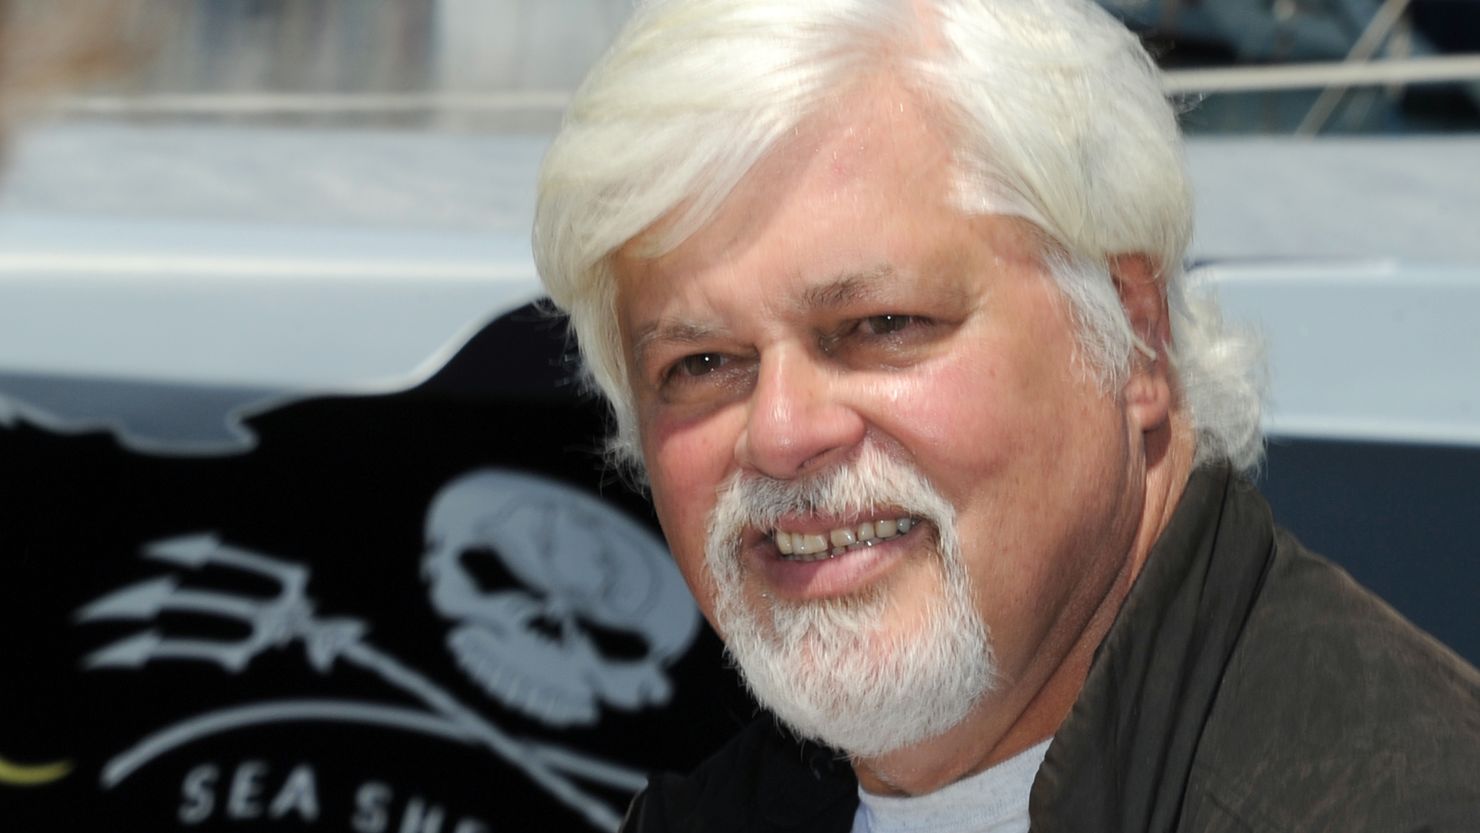 Paul Watson, pictured here in 2011, was detained at Frankfurt airport on May 13. 